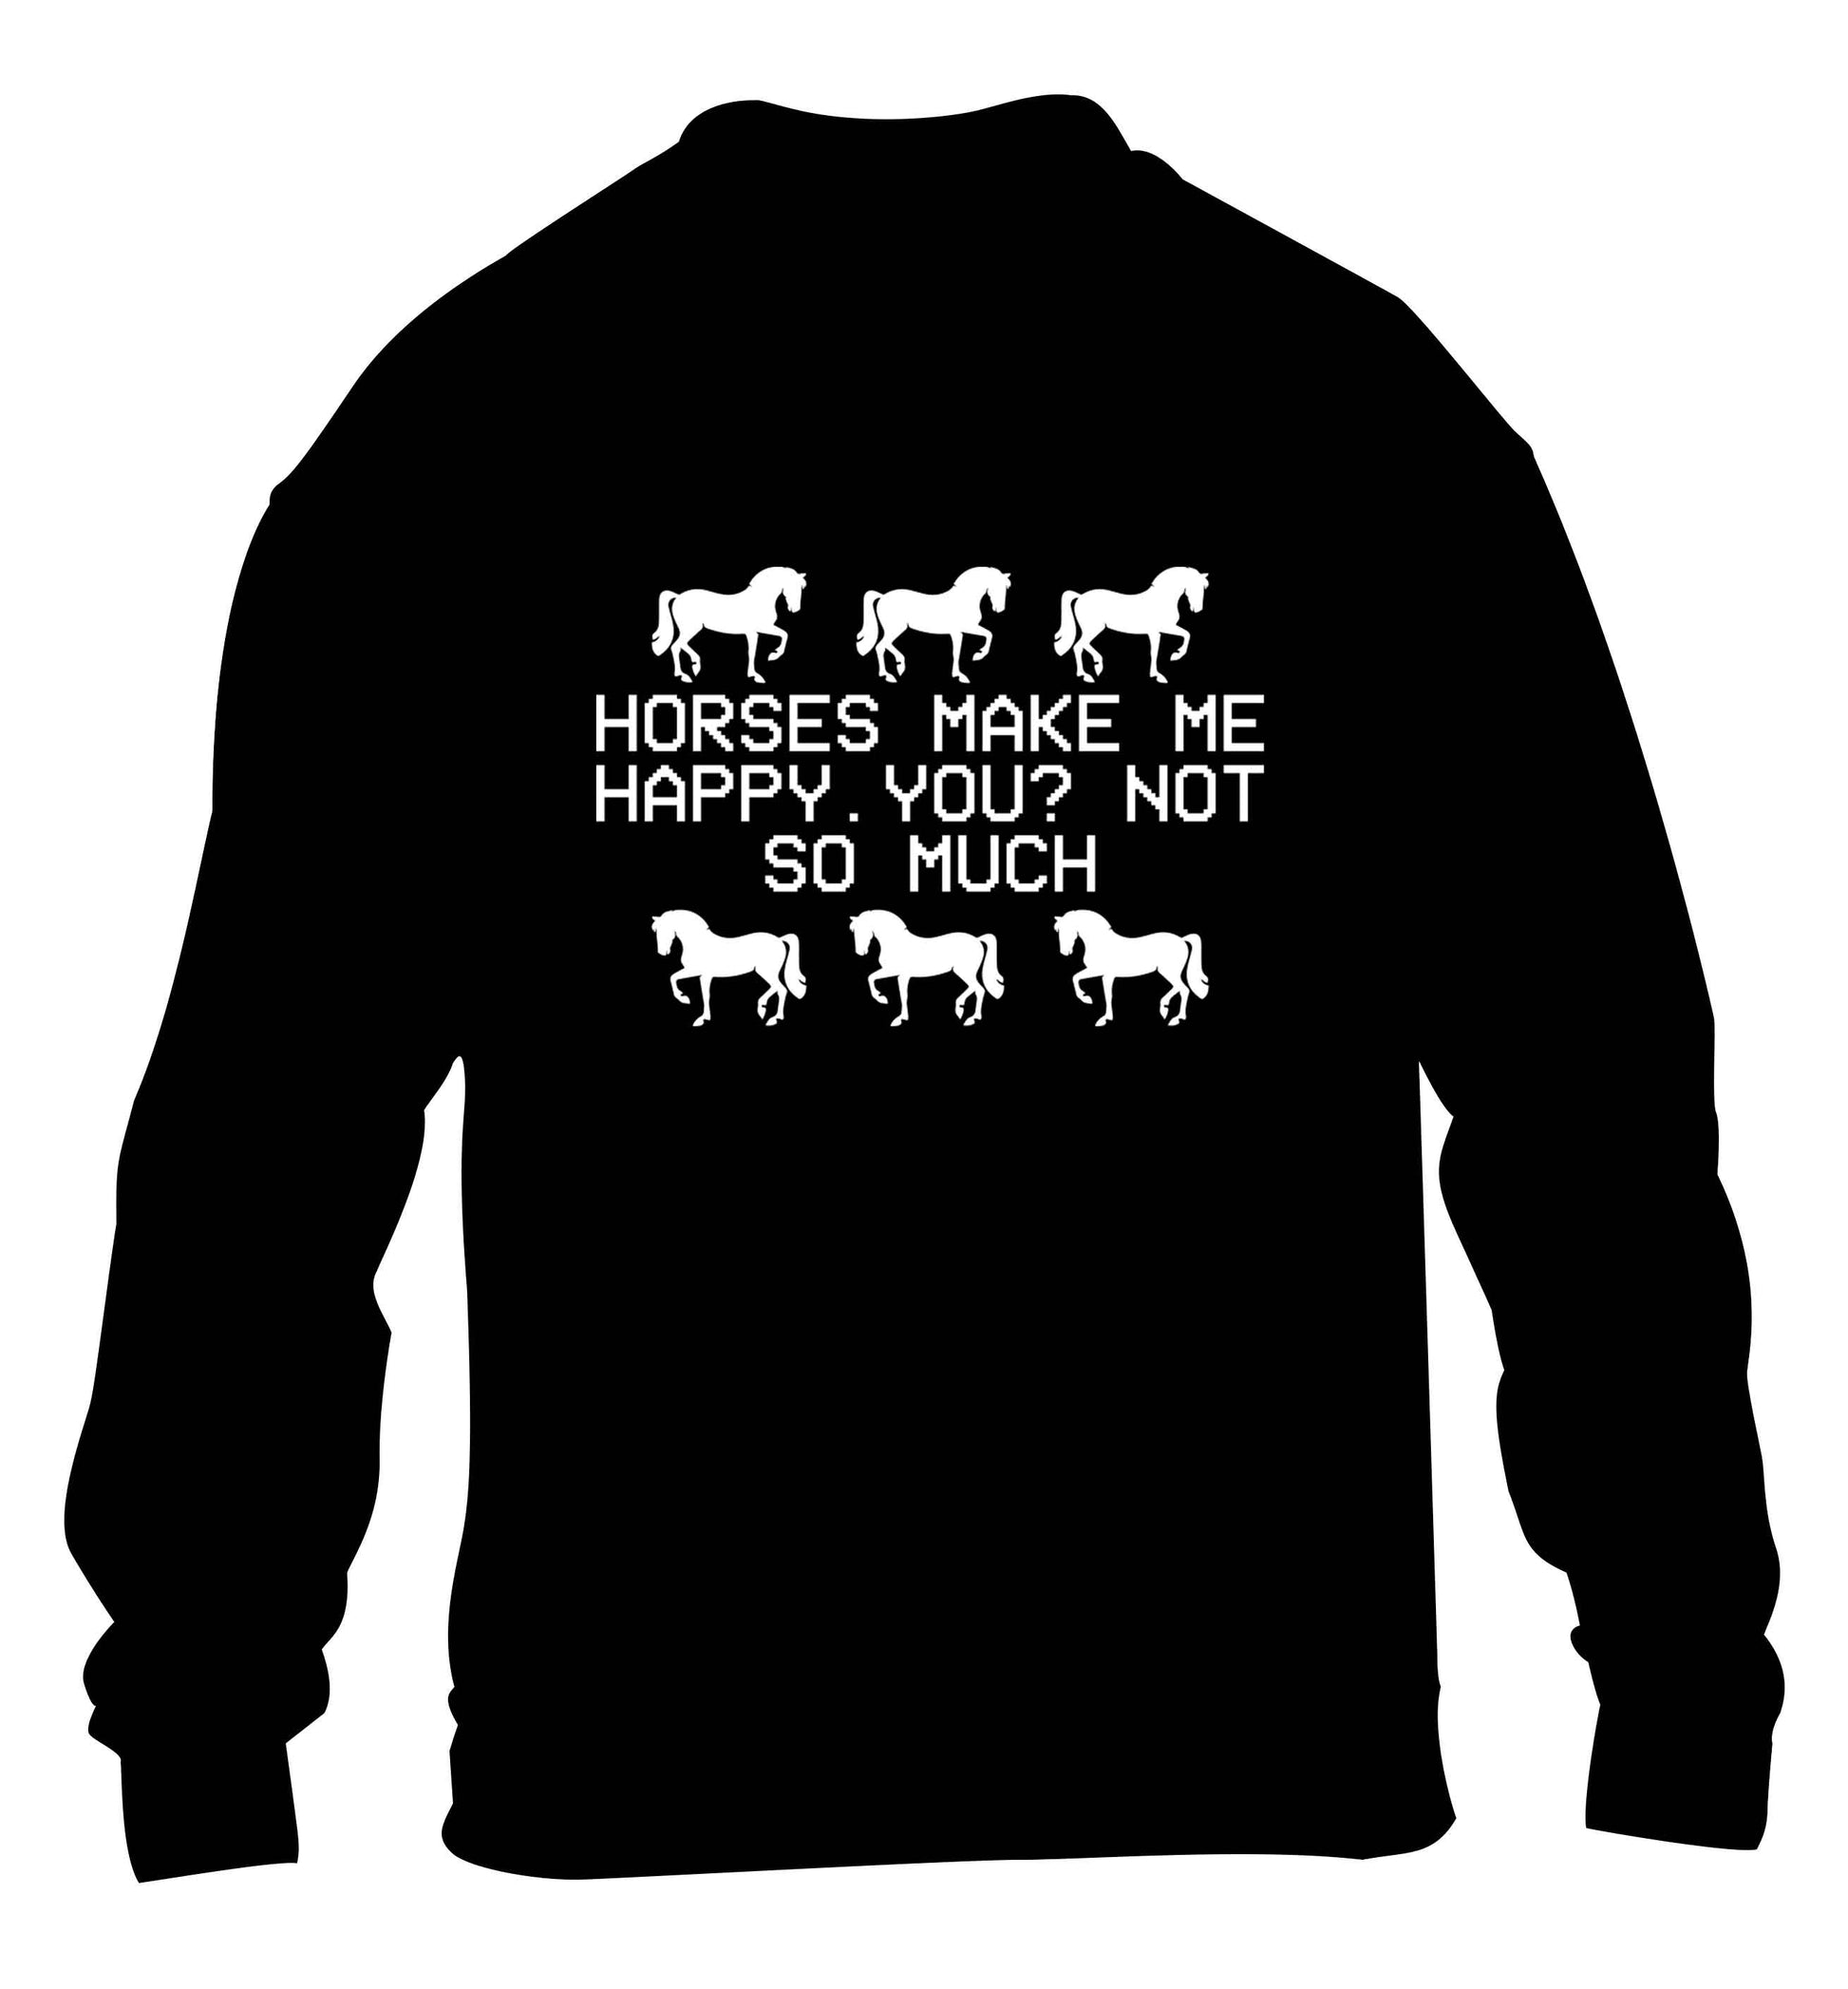 Horses make me happy, you not so much children's black sweater 12-13 Years